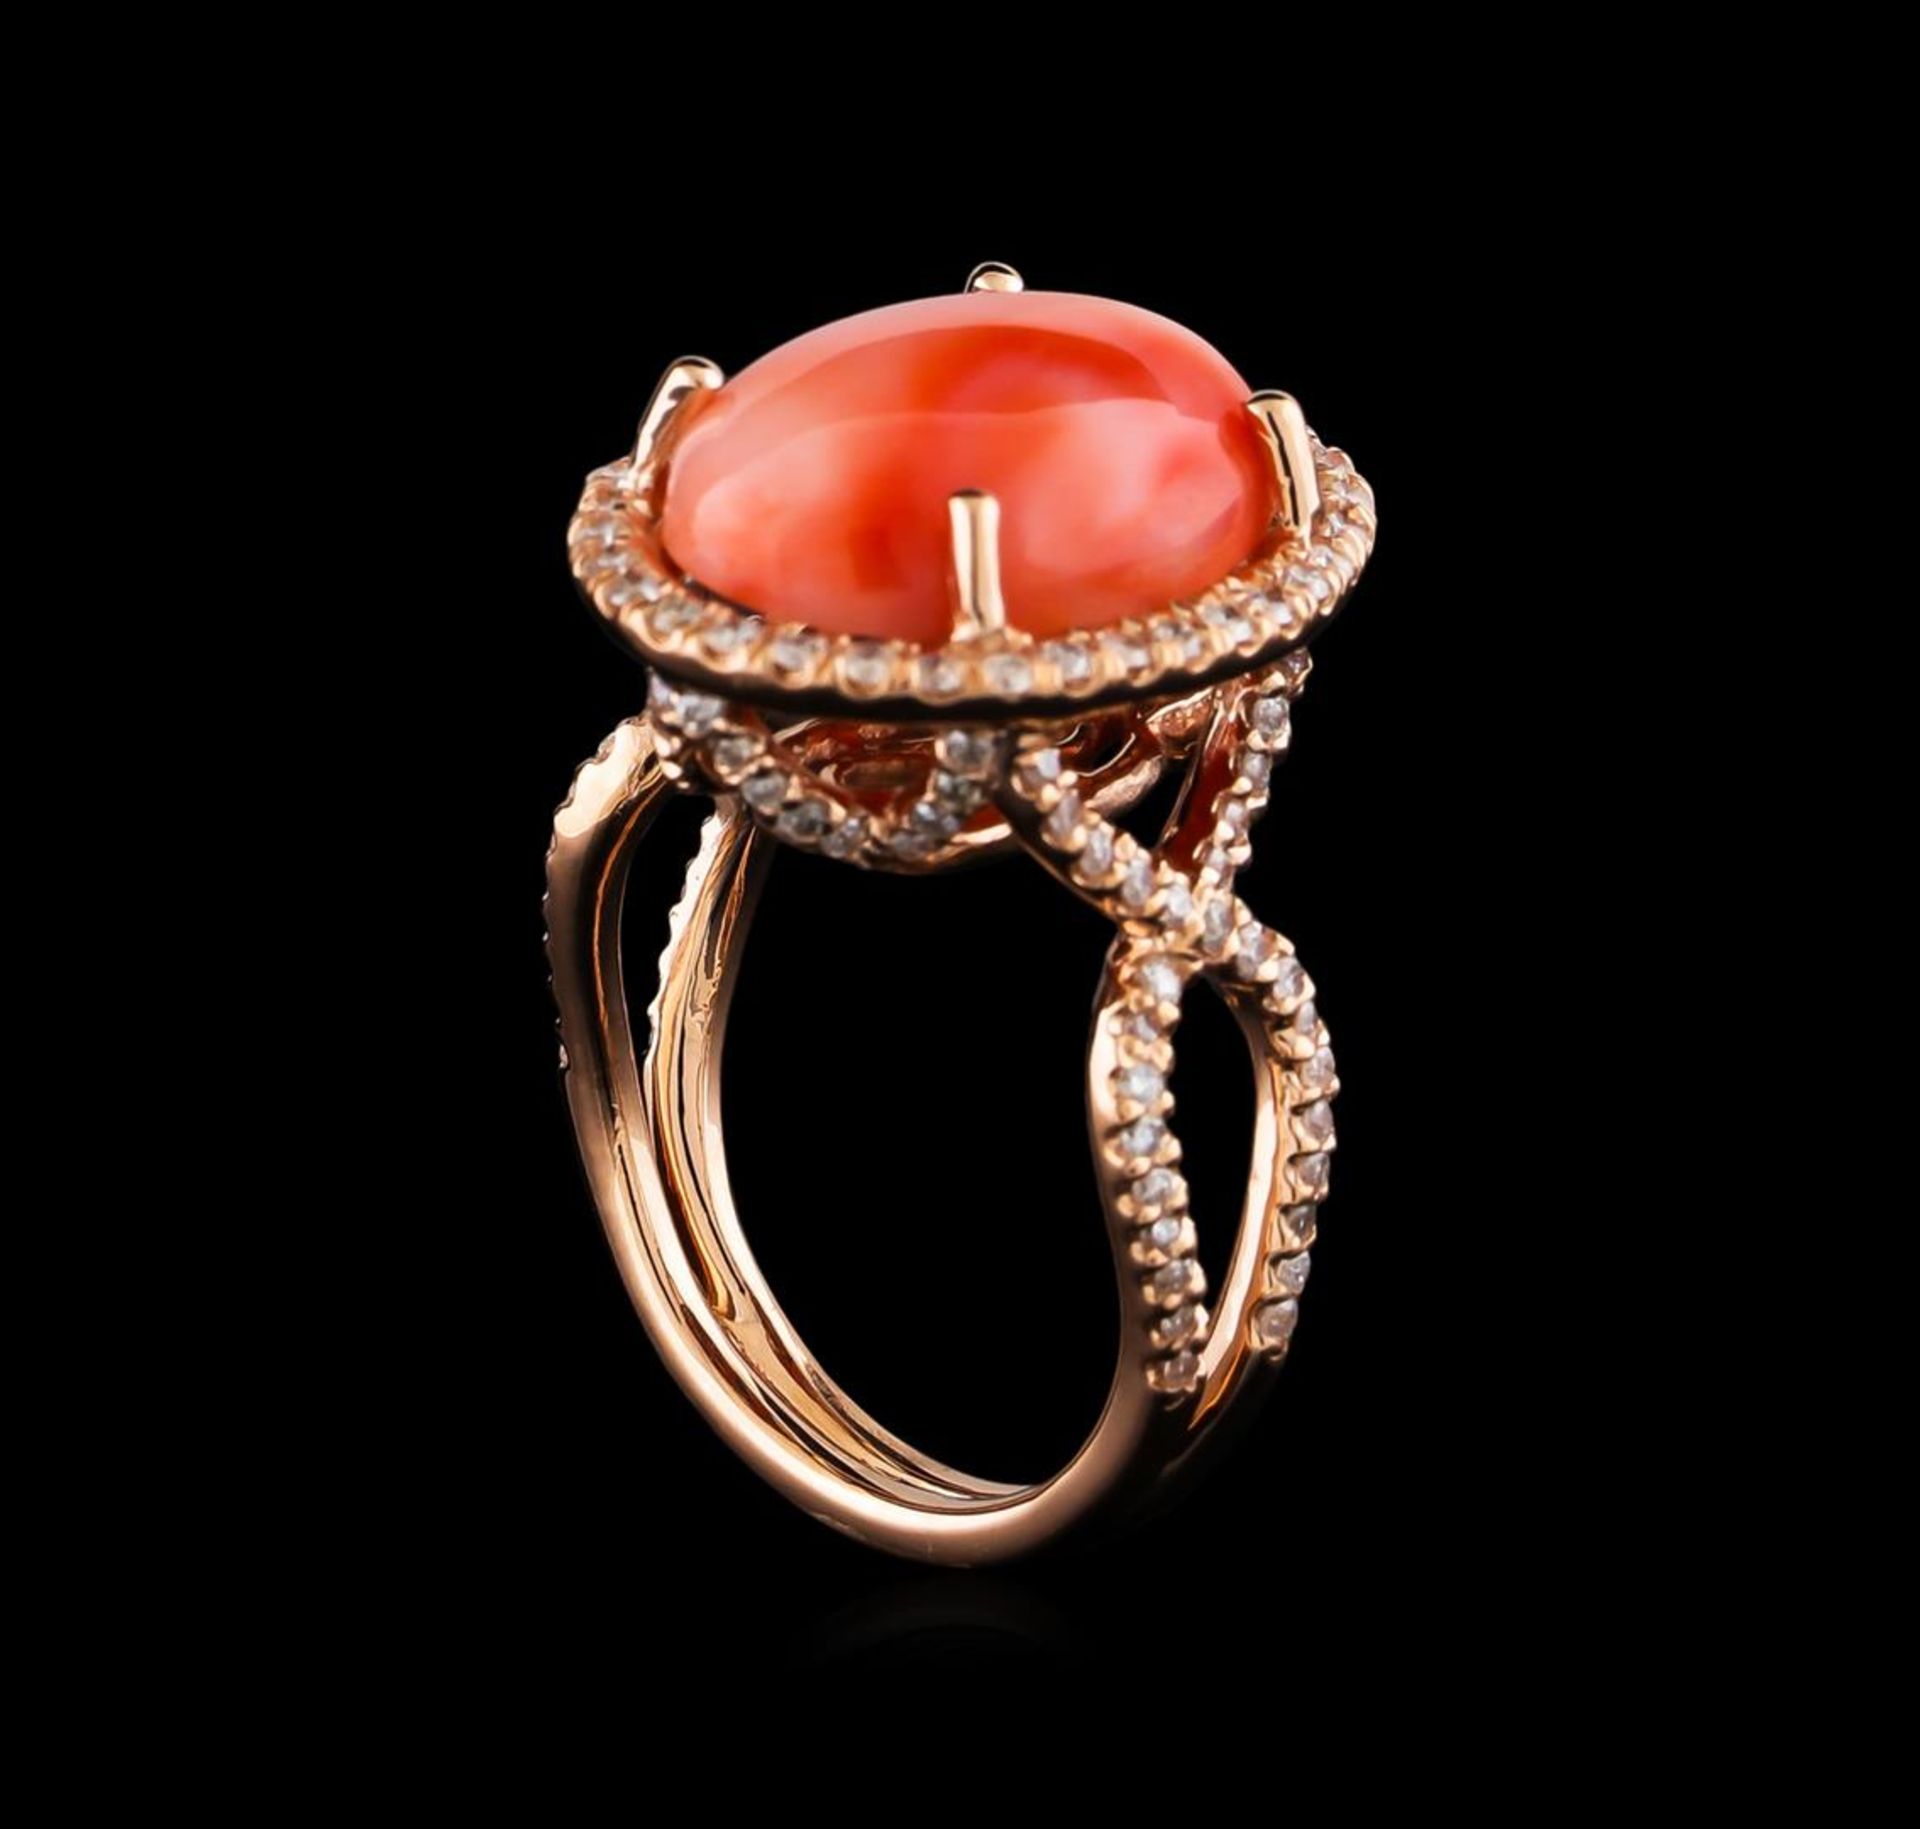 6.62 ctw Coral and Diamond Ring - 14KT Rose Gold - Image 4 of 5